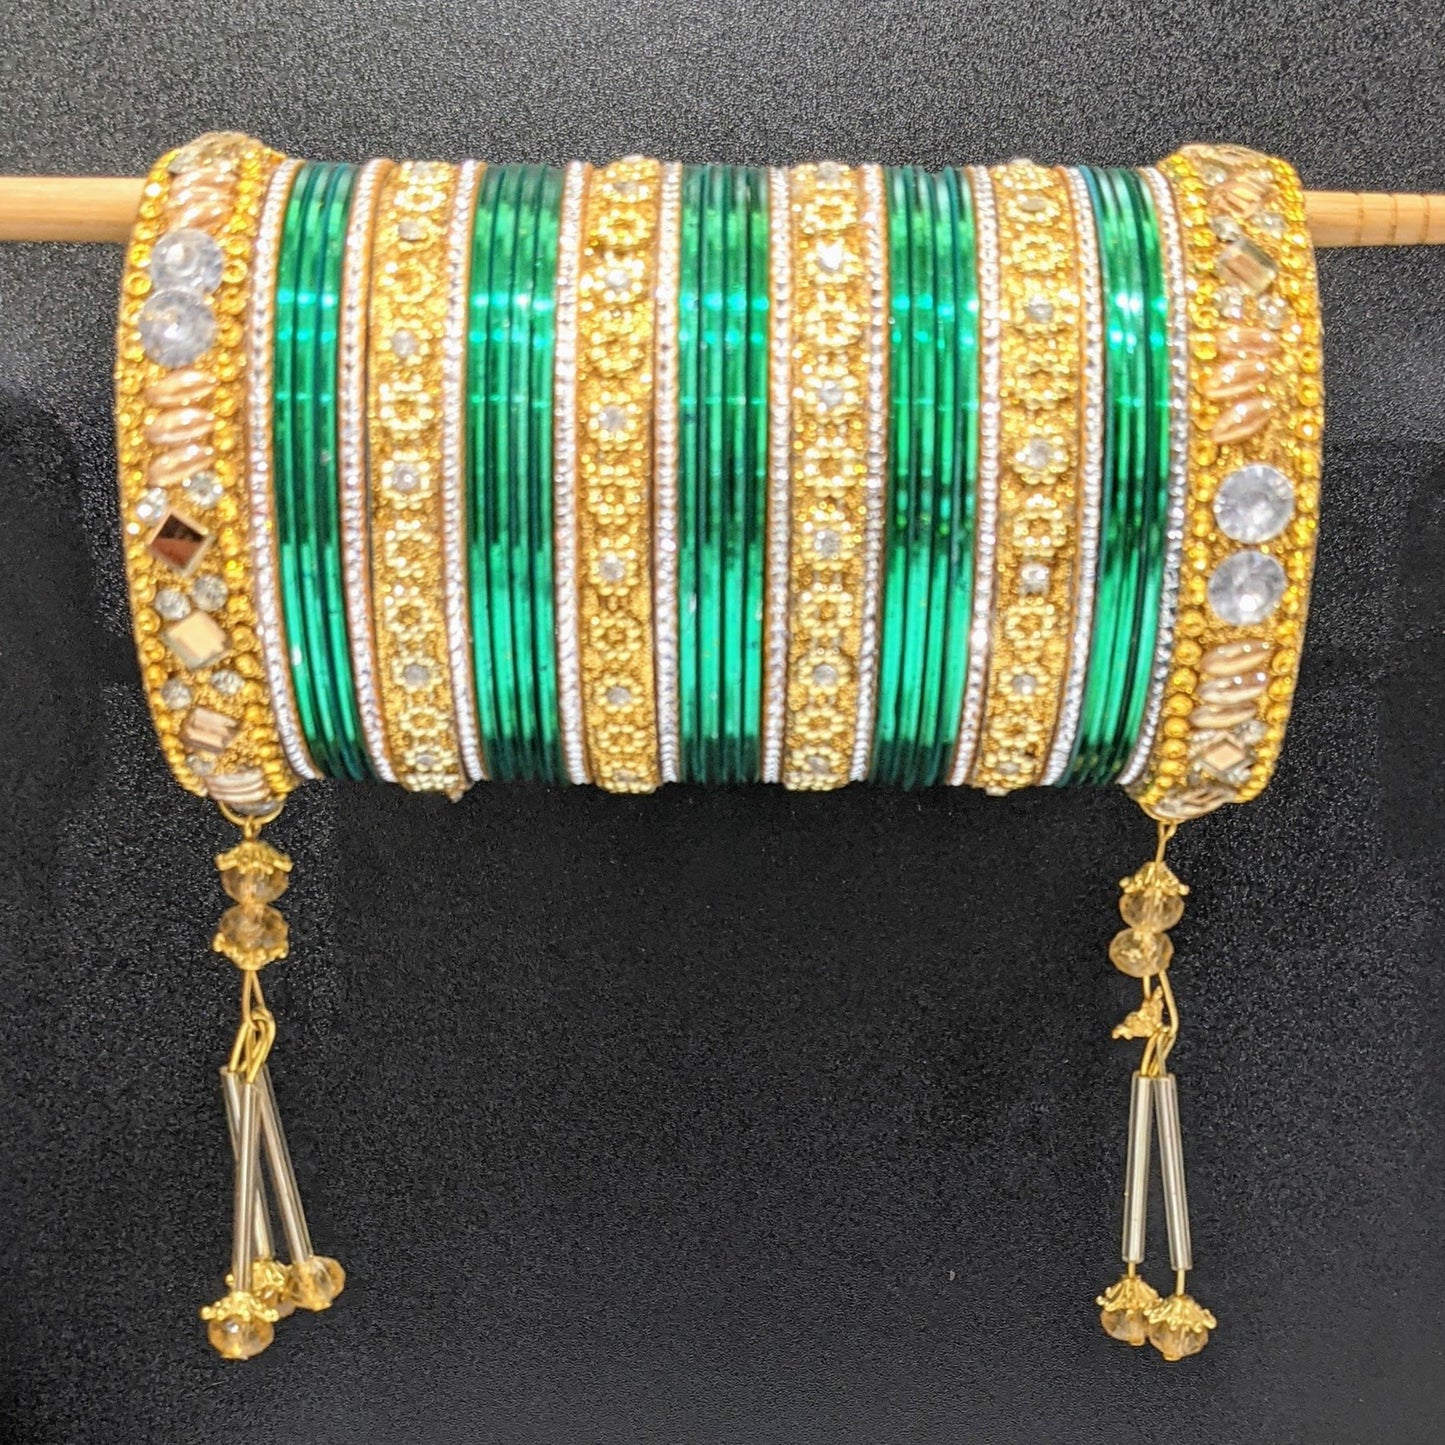 Bangles Large Set with Tassels : Green